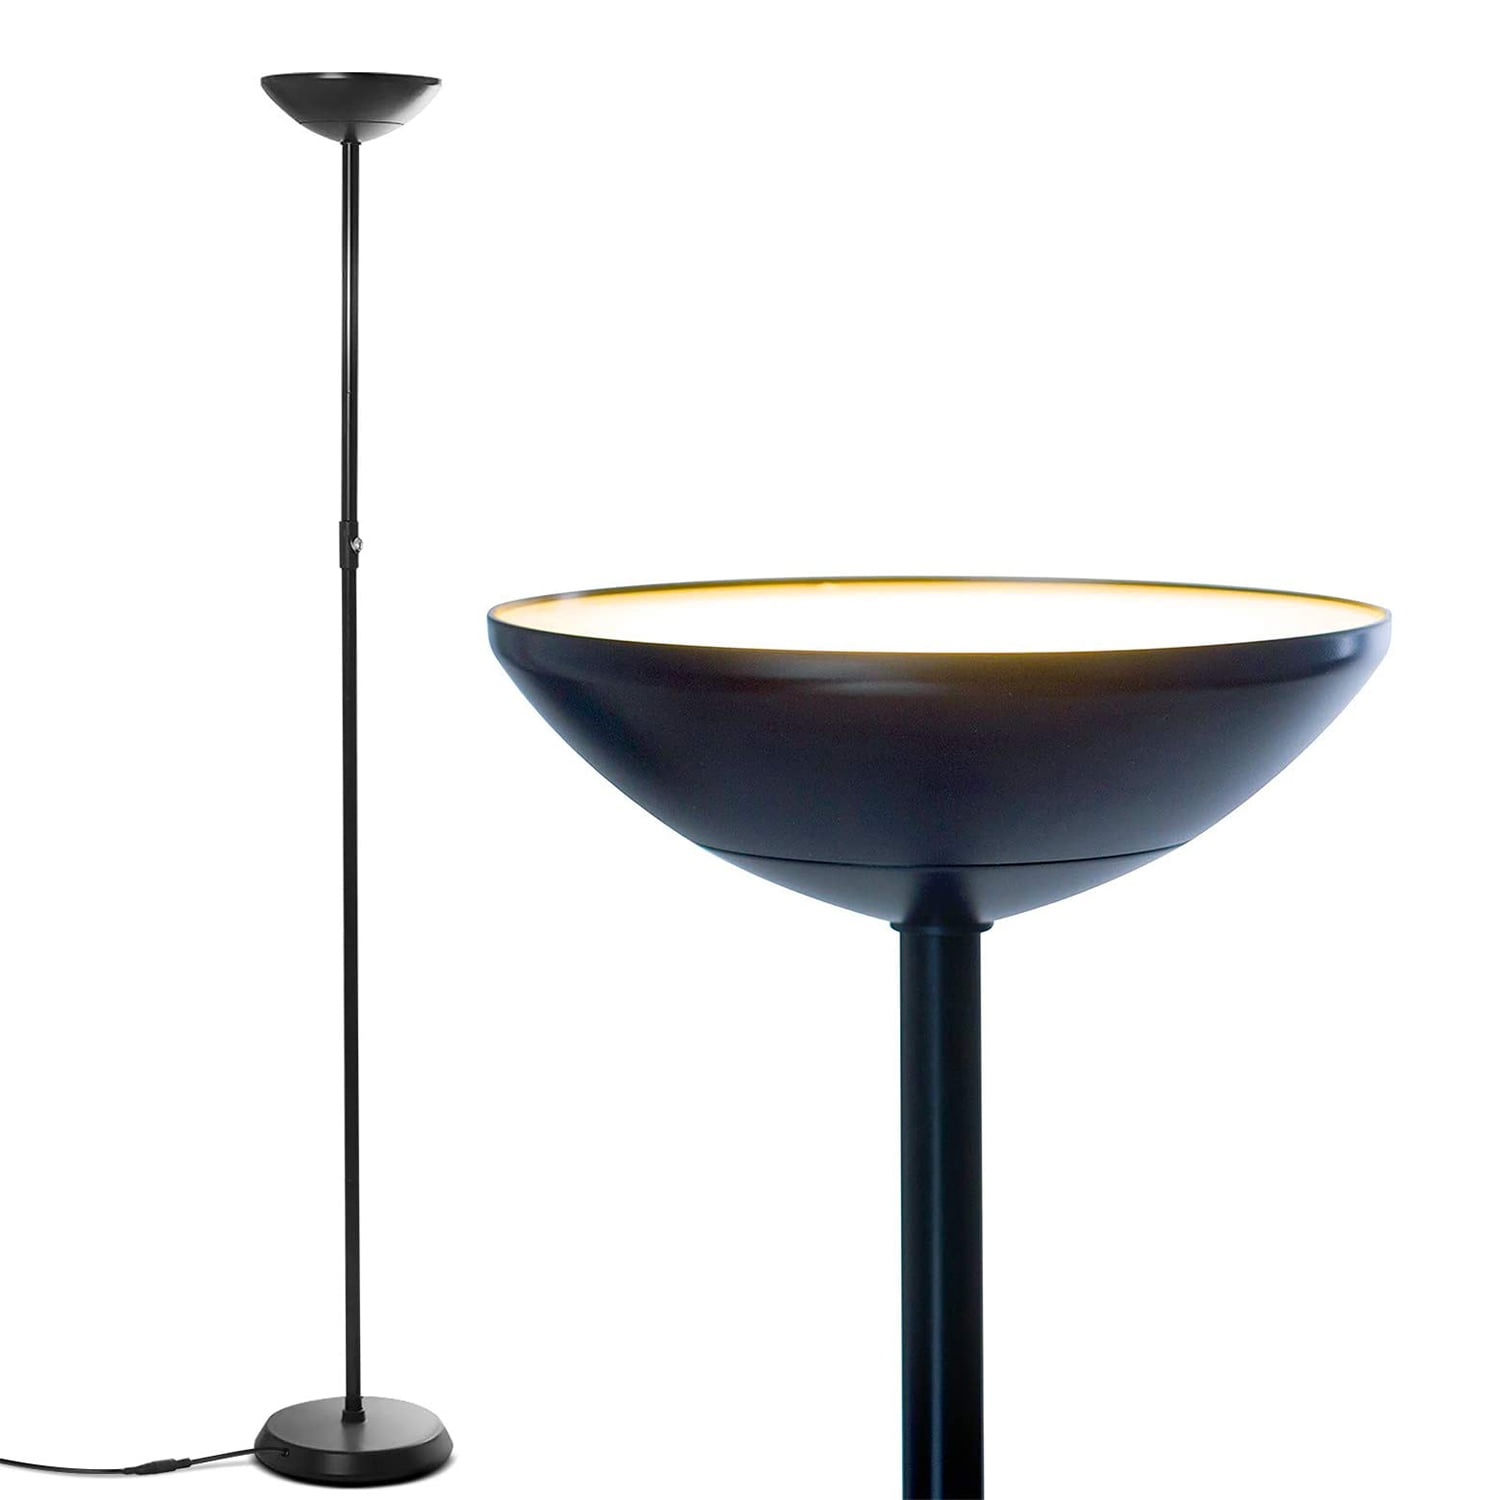 Brightech SkyLite - Bright LED Torchiere Floor Lamp for Offices